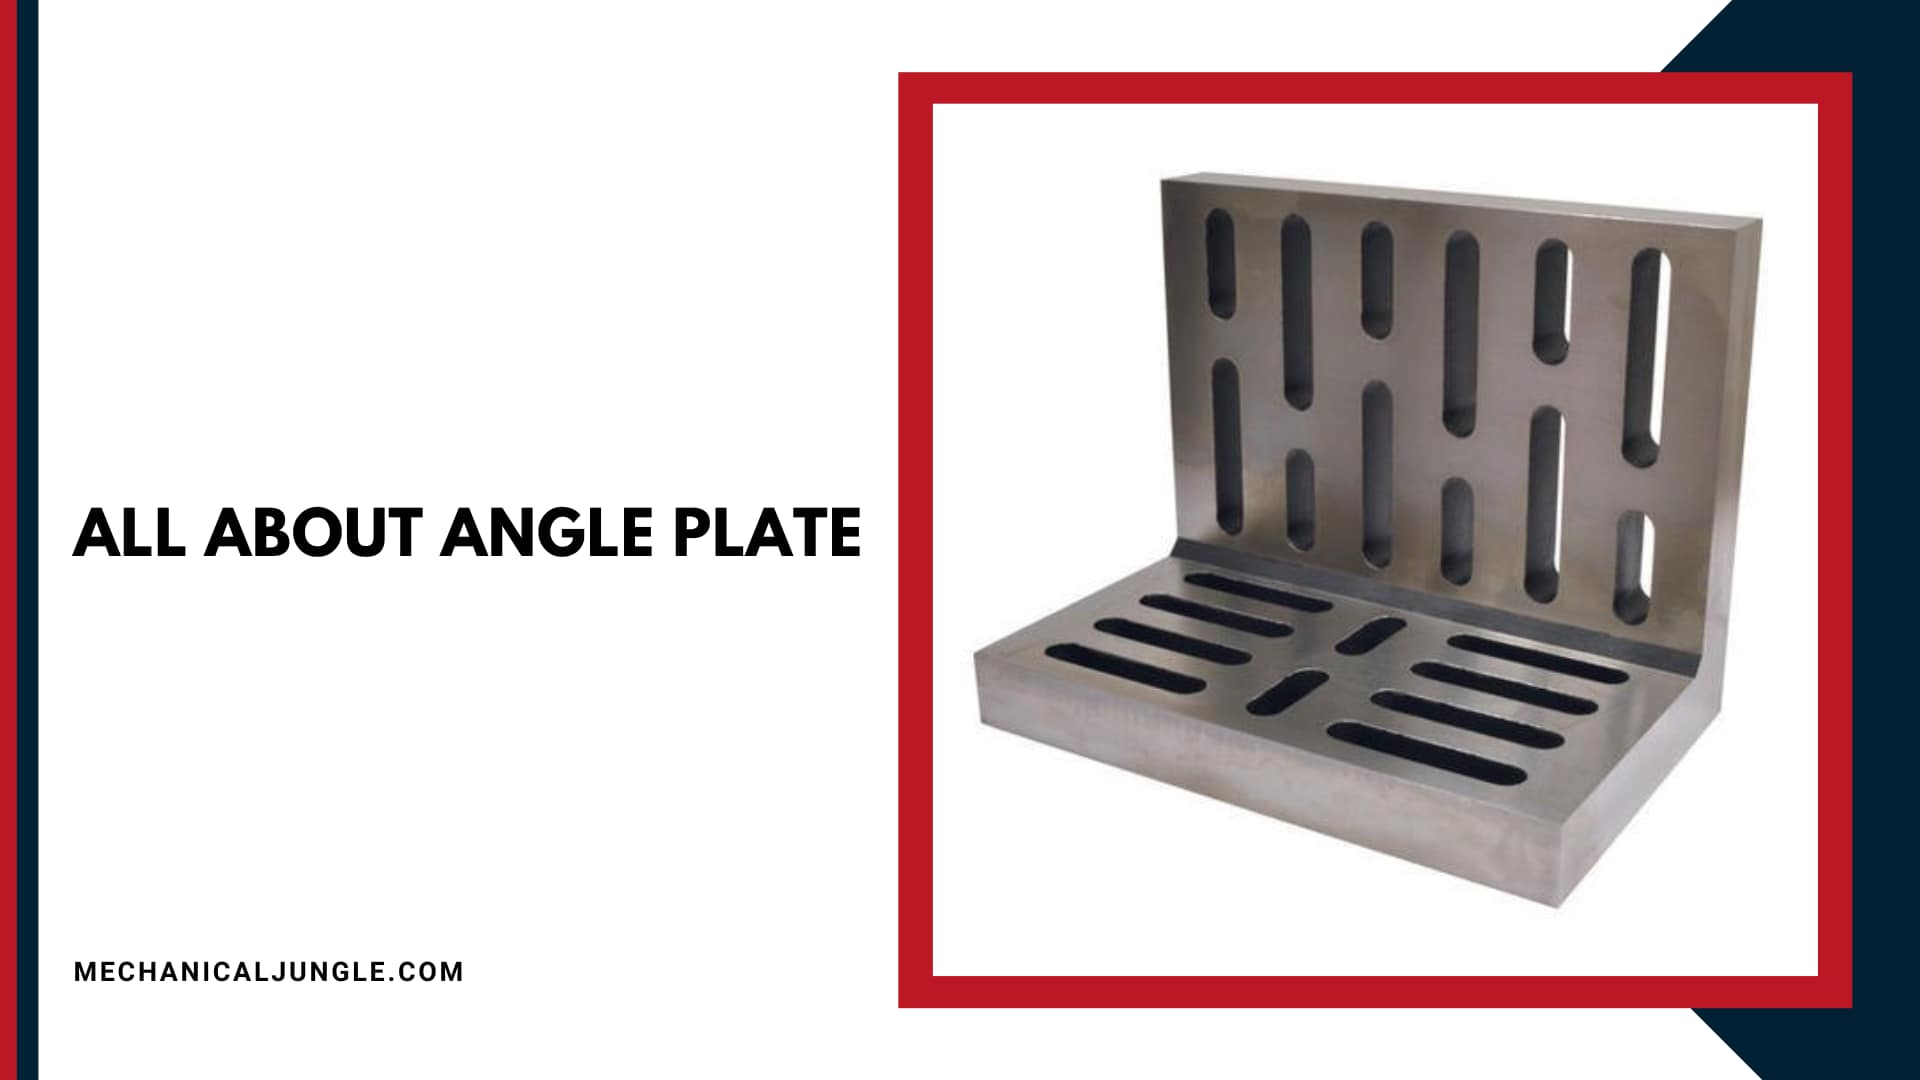 All About Angle Plate